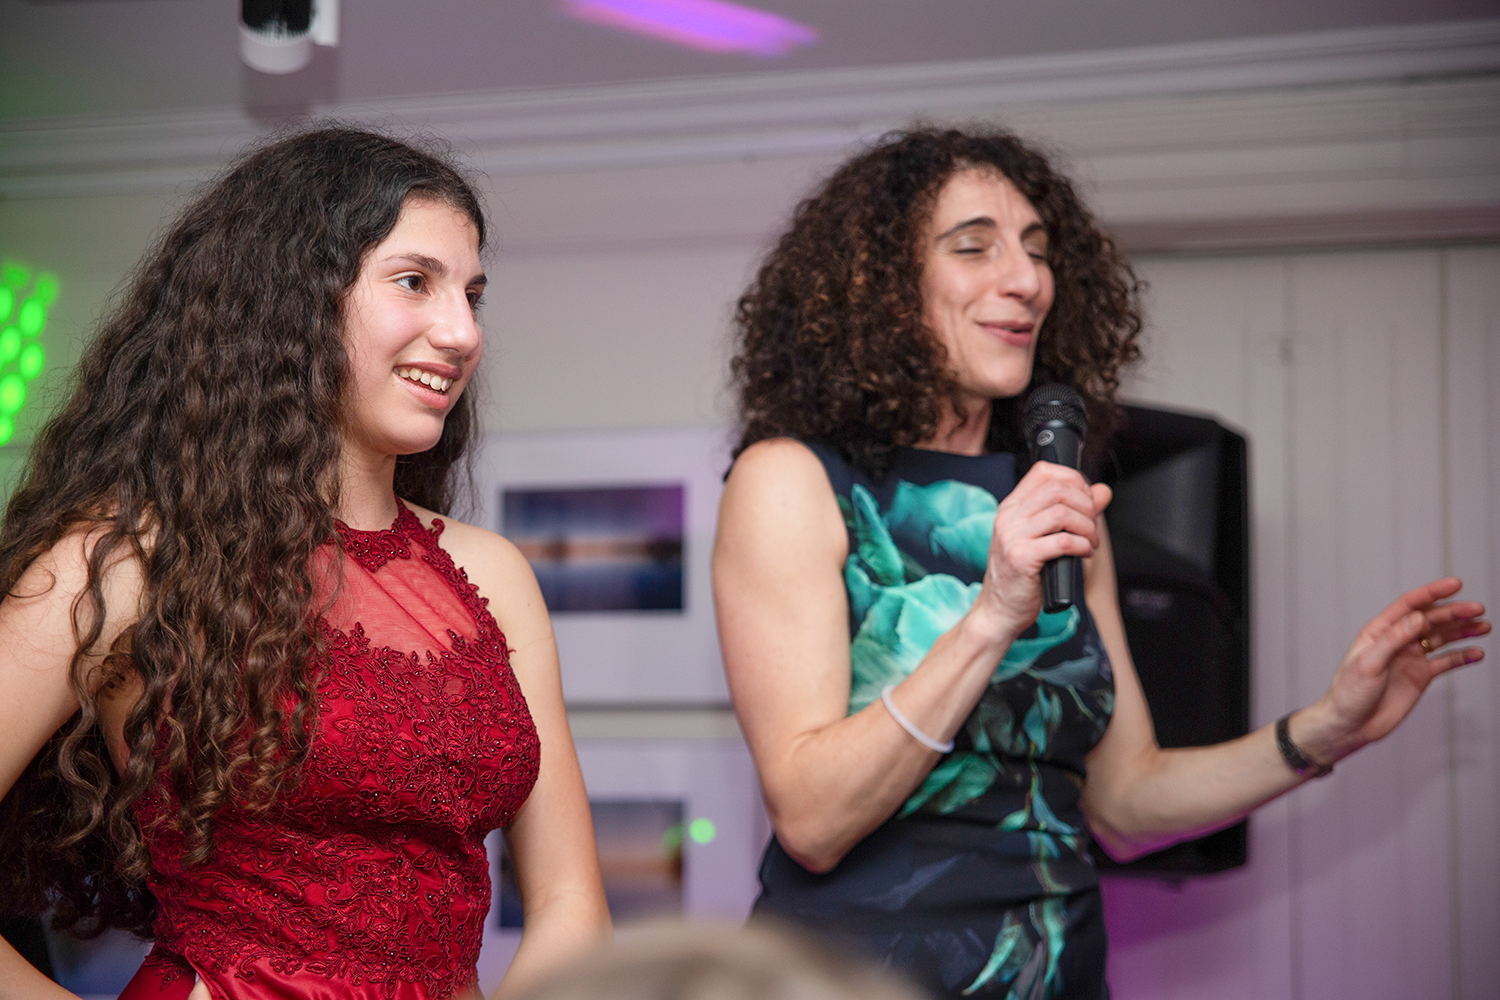 Mum and daughter making speech at party